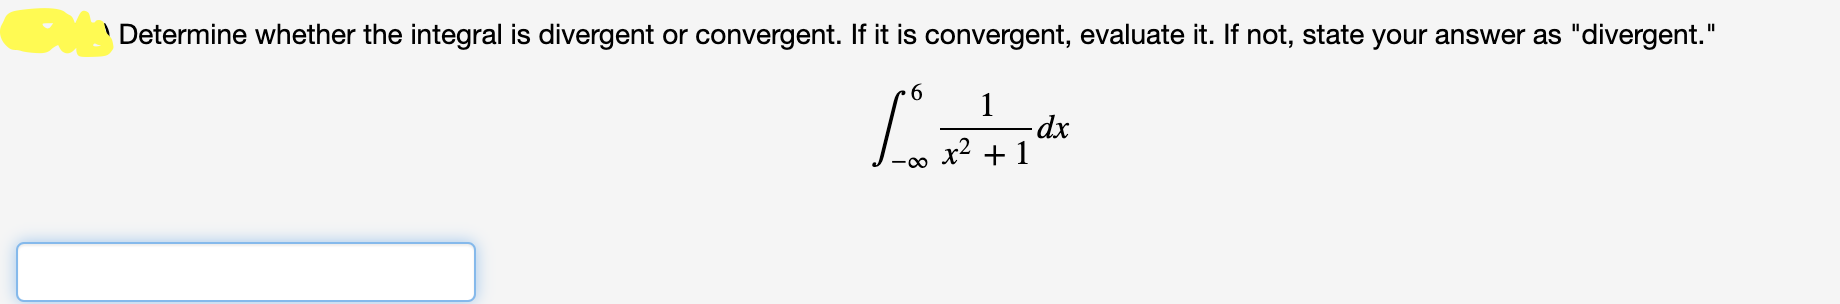 ' Determine whether the integral is divergent or convergent. If it is convergent, evaluate it. If not, state your answer as "divergent."
-dp-
x2 +1
